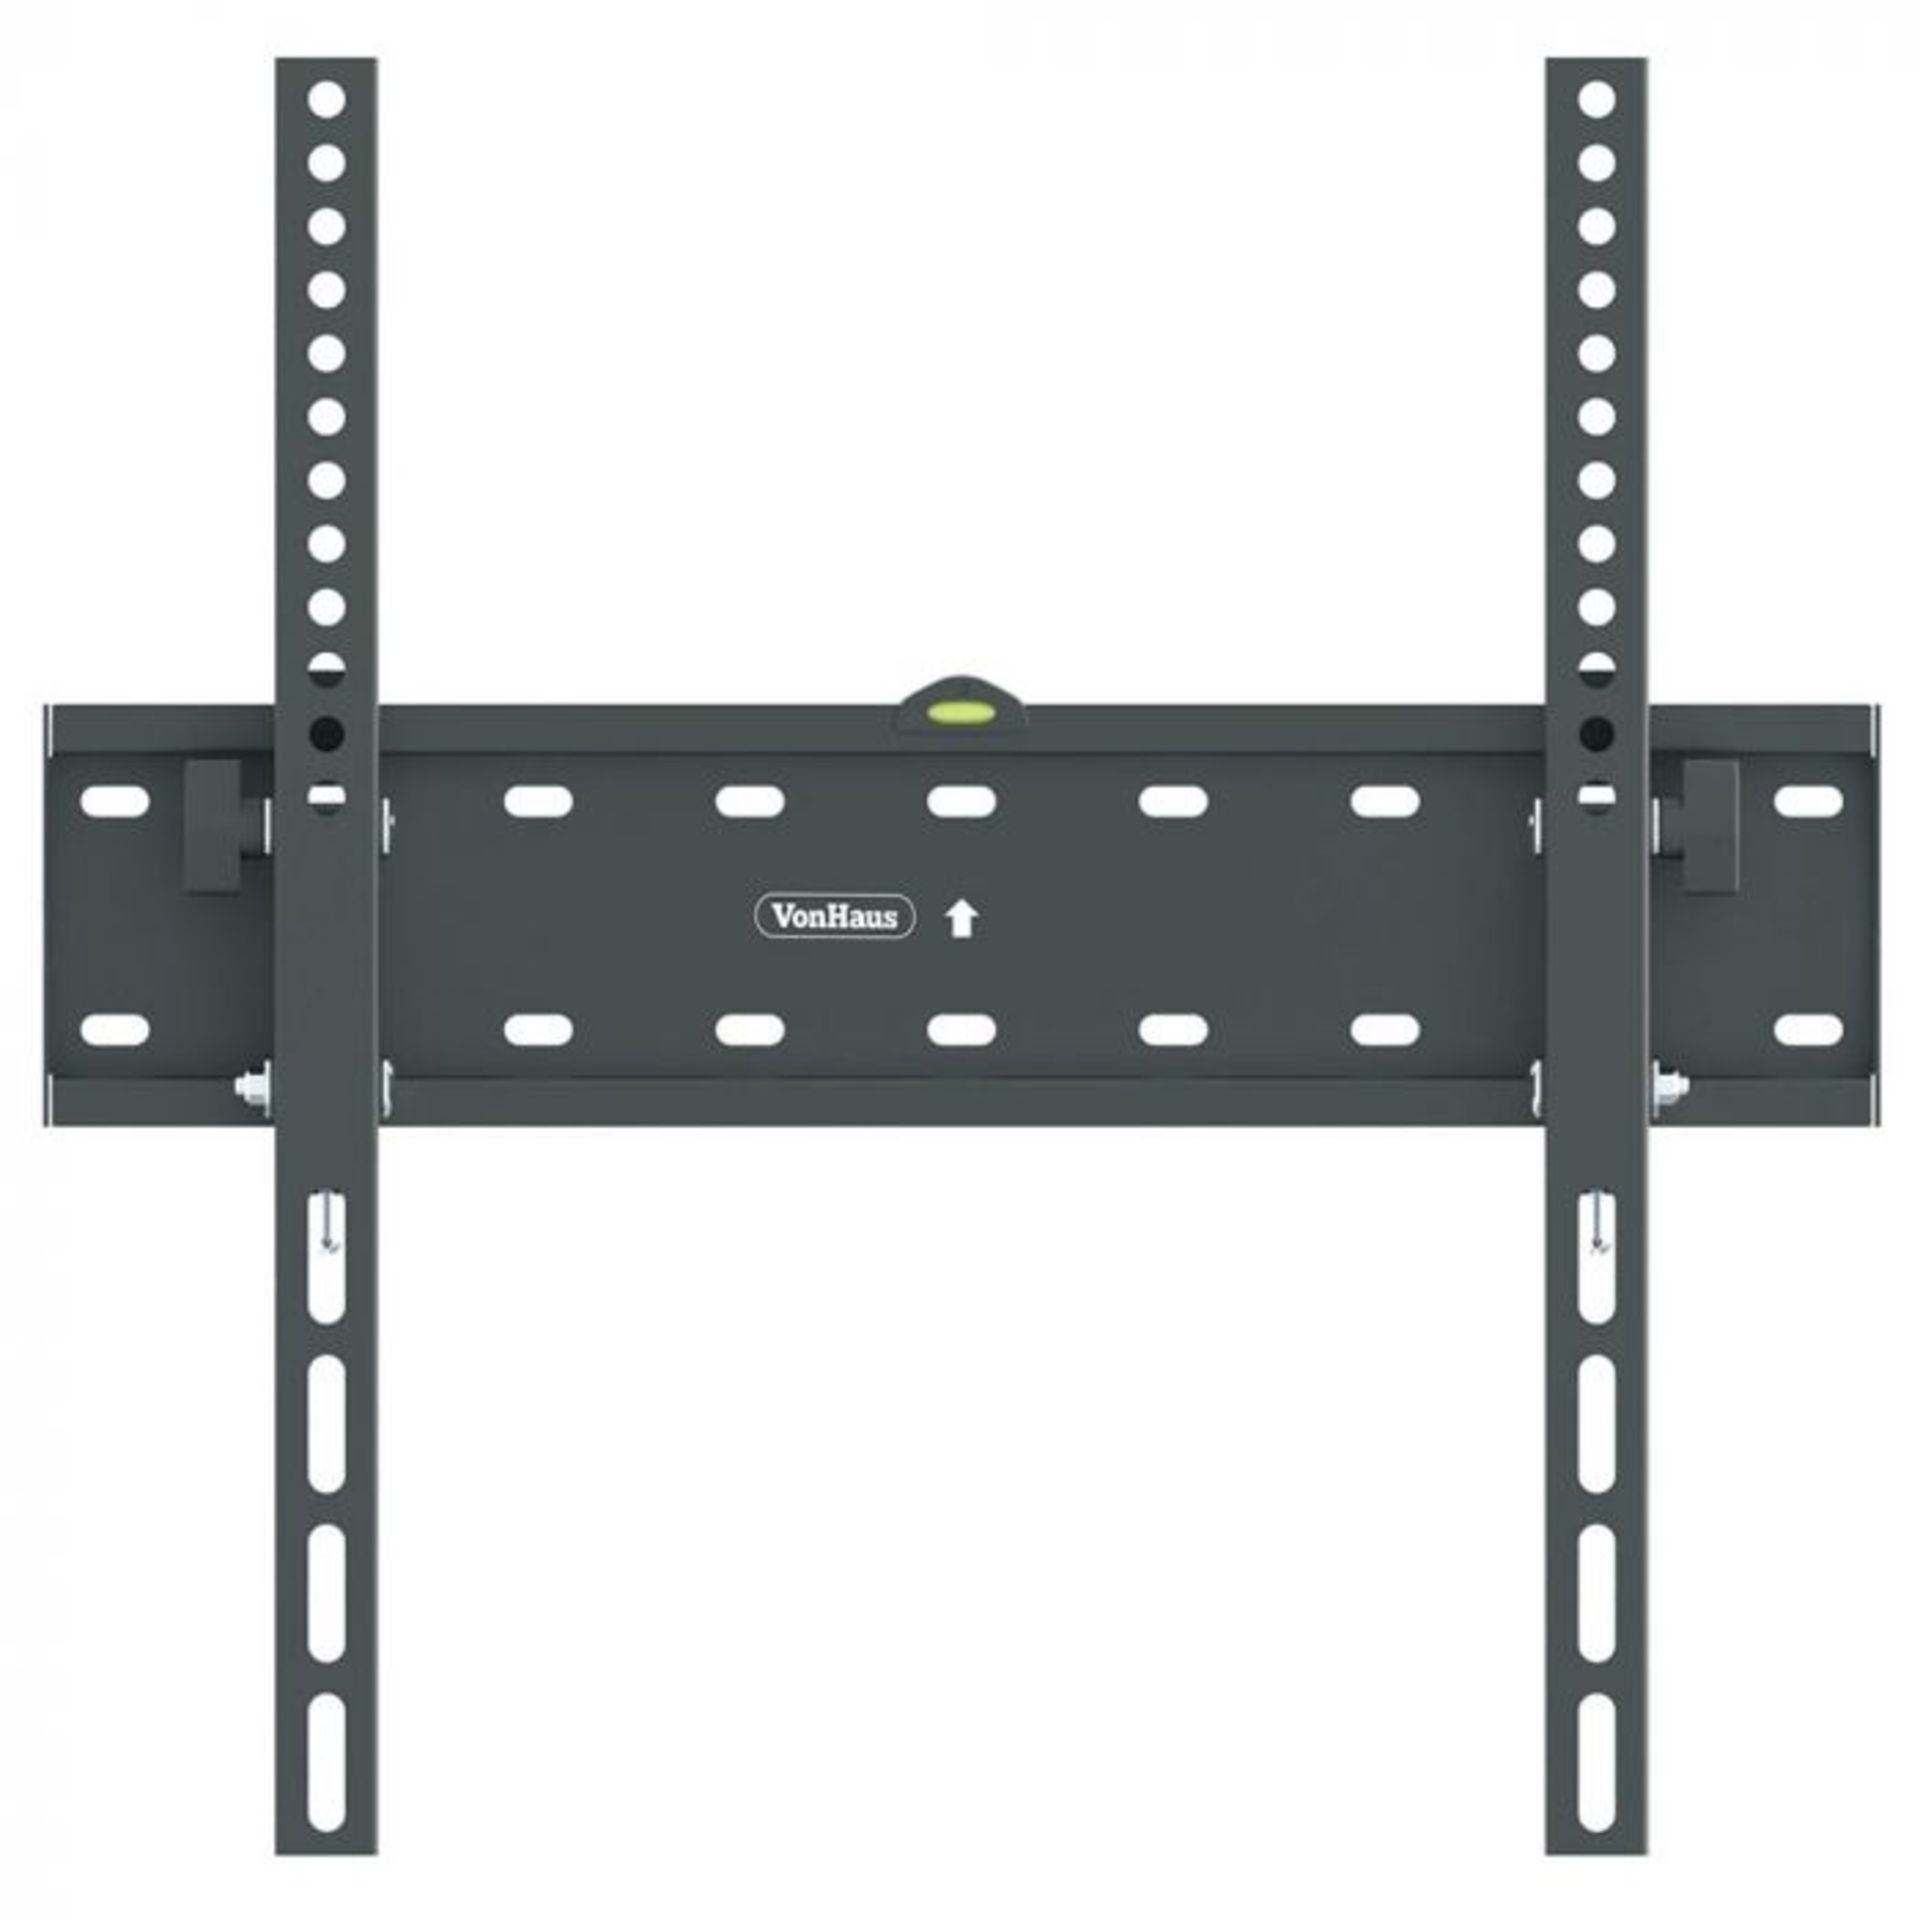 (NN30) 26-55 inch Tilt TV bracket Please confirm your TV’s VESA Mounting Dimensions and Scre... - Image 2 of 2